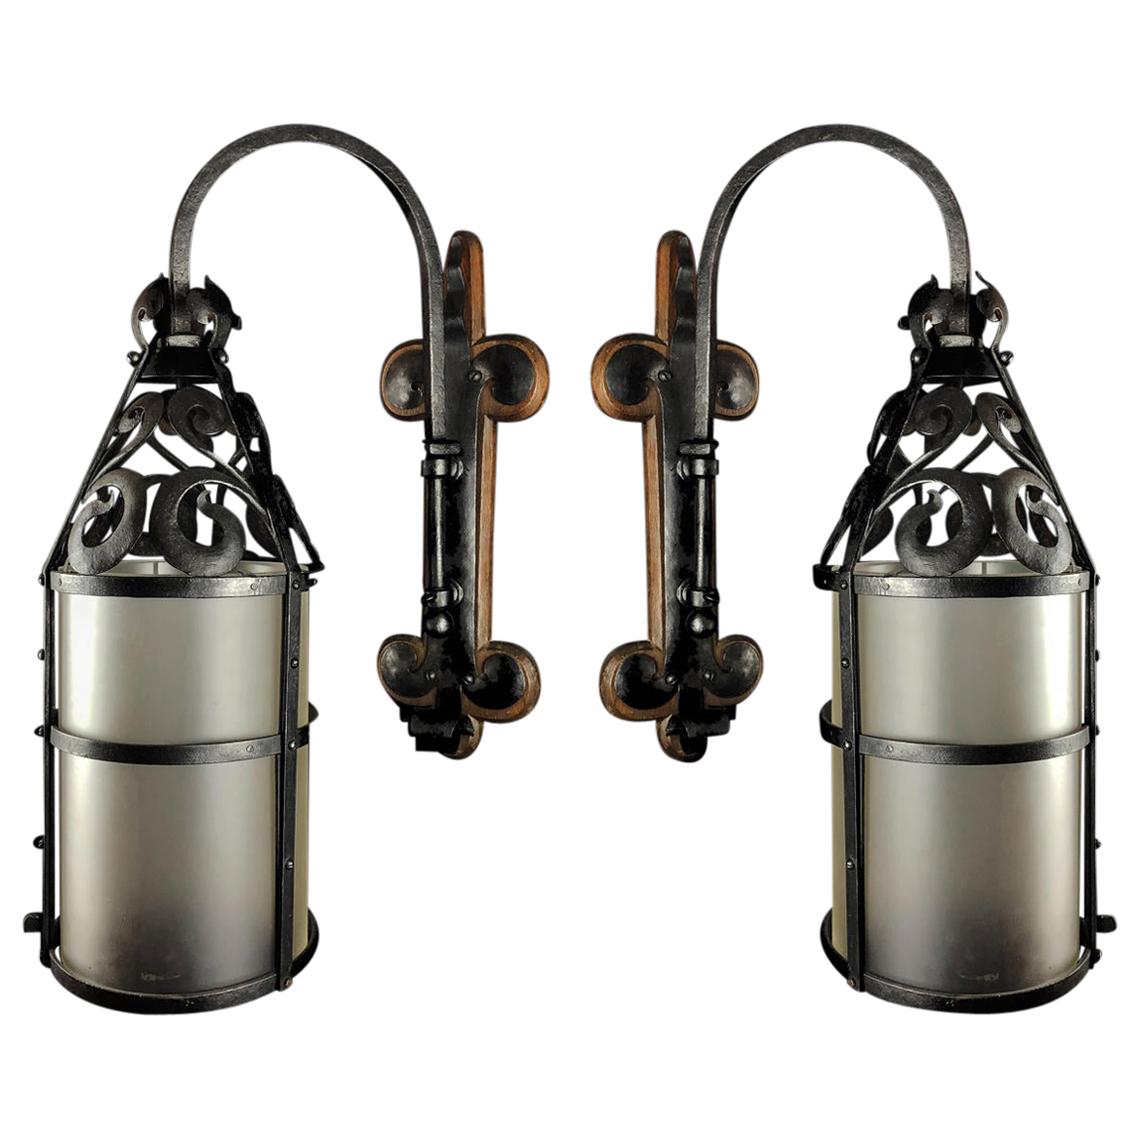 Pair of Wrought Iron & Frosted Glass Wall Lights in Arts & Crafts Style c1910 For Sale